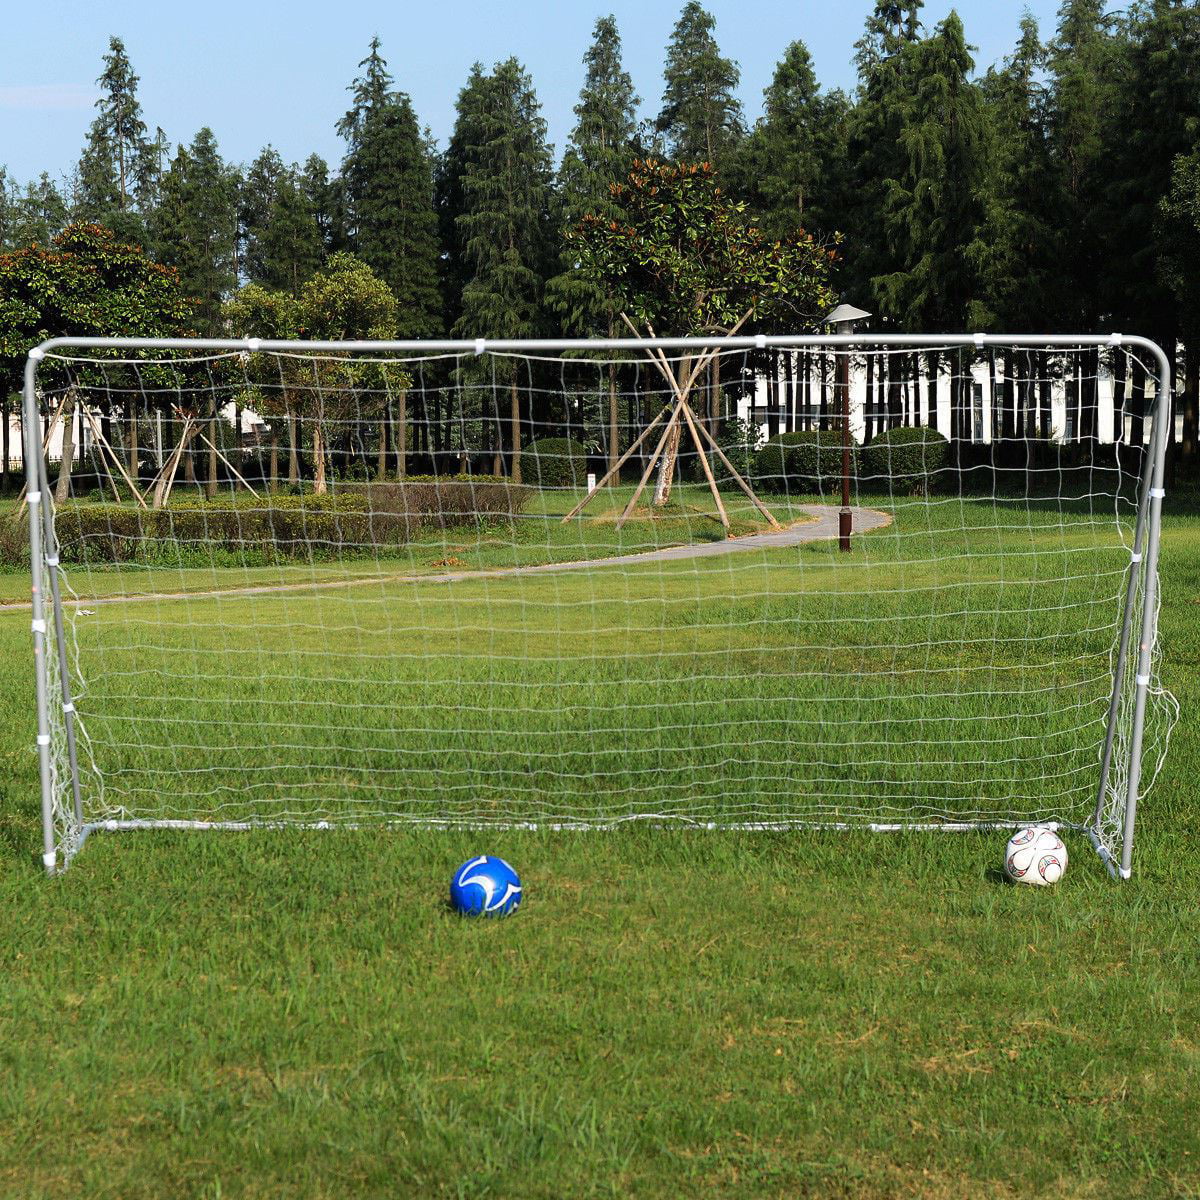 RUBELLA 8' x 5' Soccer Goal Football W/Net Straps Anchor Ball Training Sets with Frame 